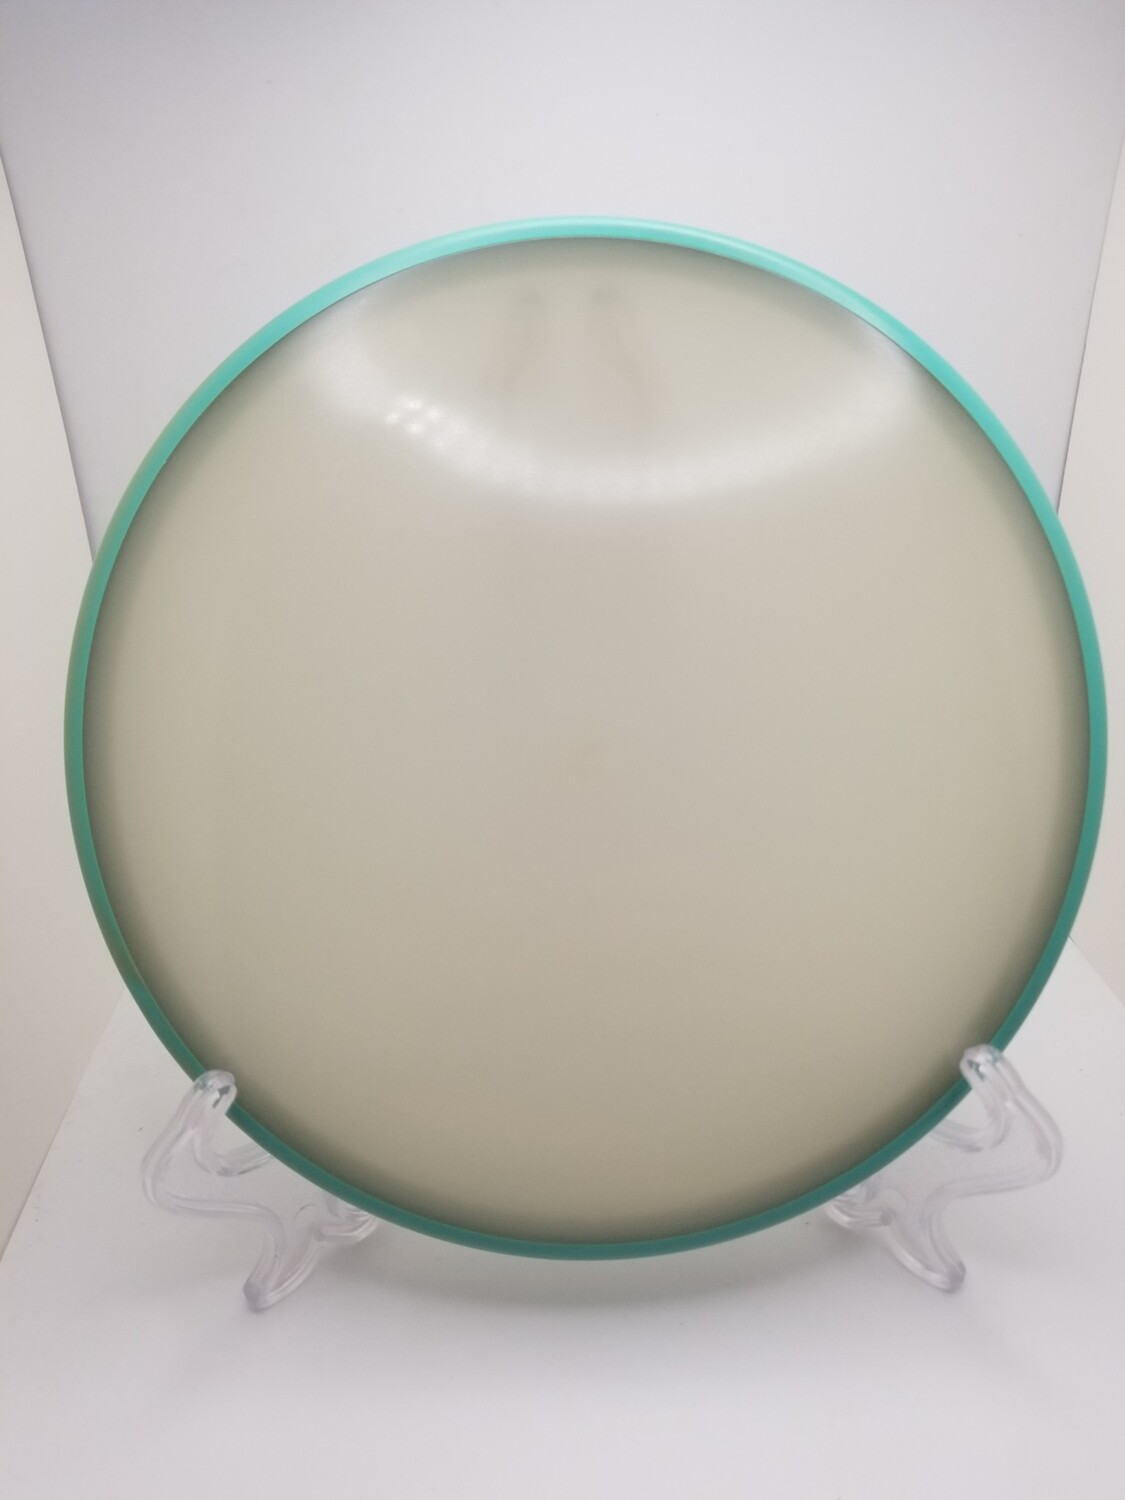 Axiom Discs Envy Glow Eclipse Blank with Teal Blue with swirl of Peach Rim 172g